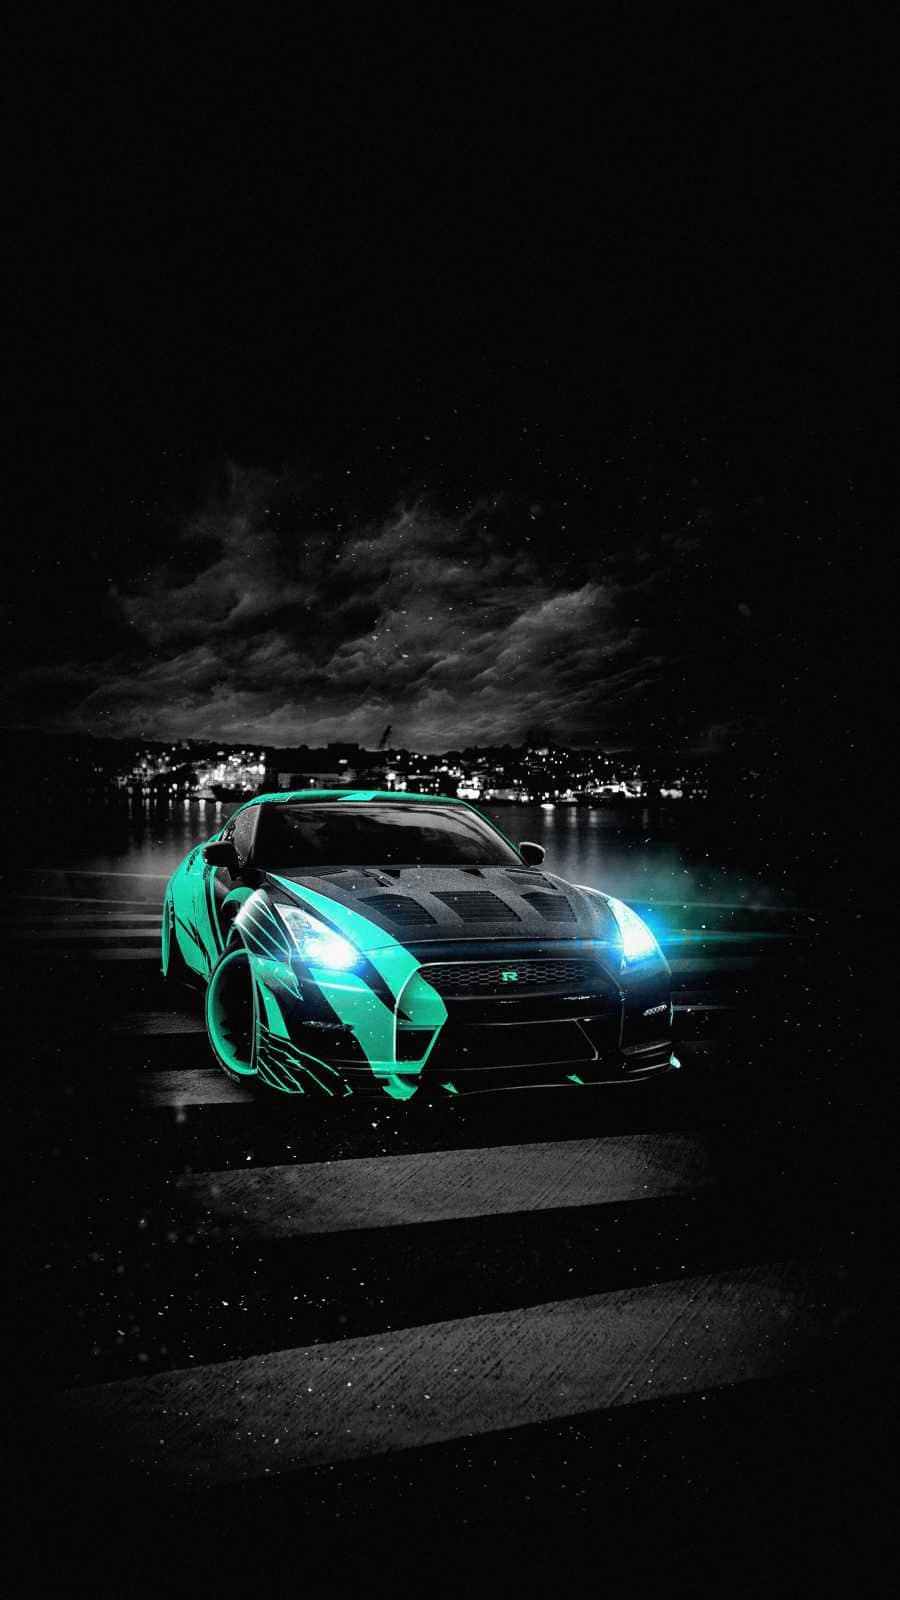 A Car Is On The Road At Night Wallpaper